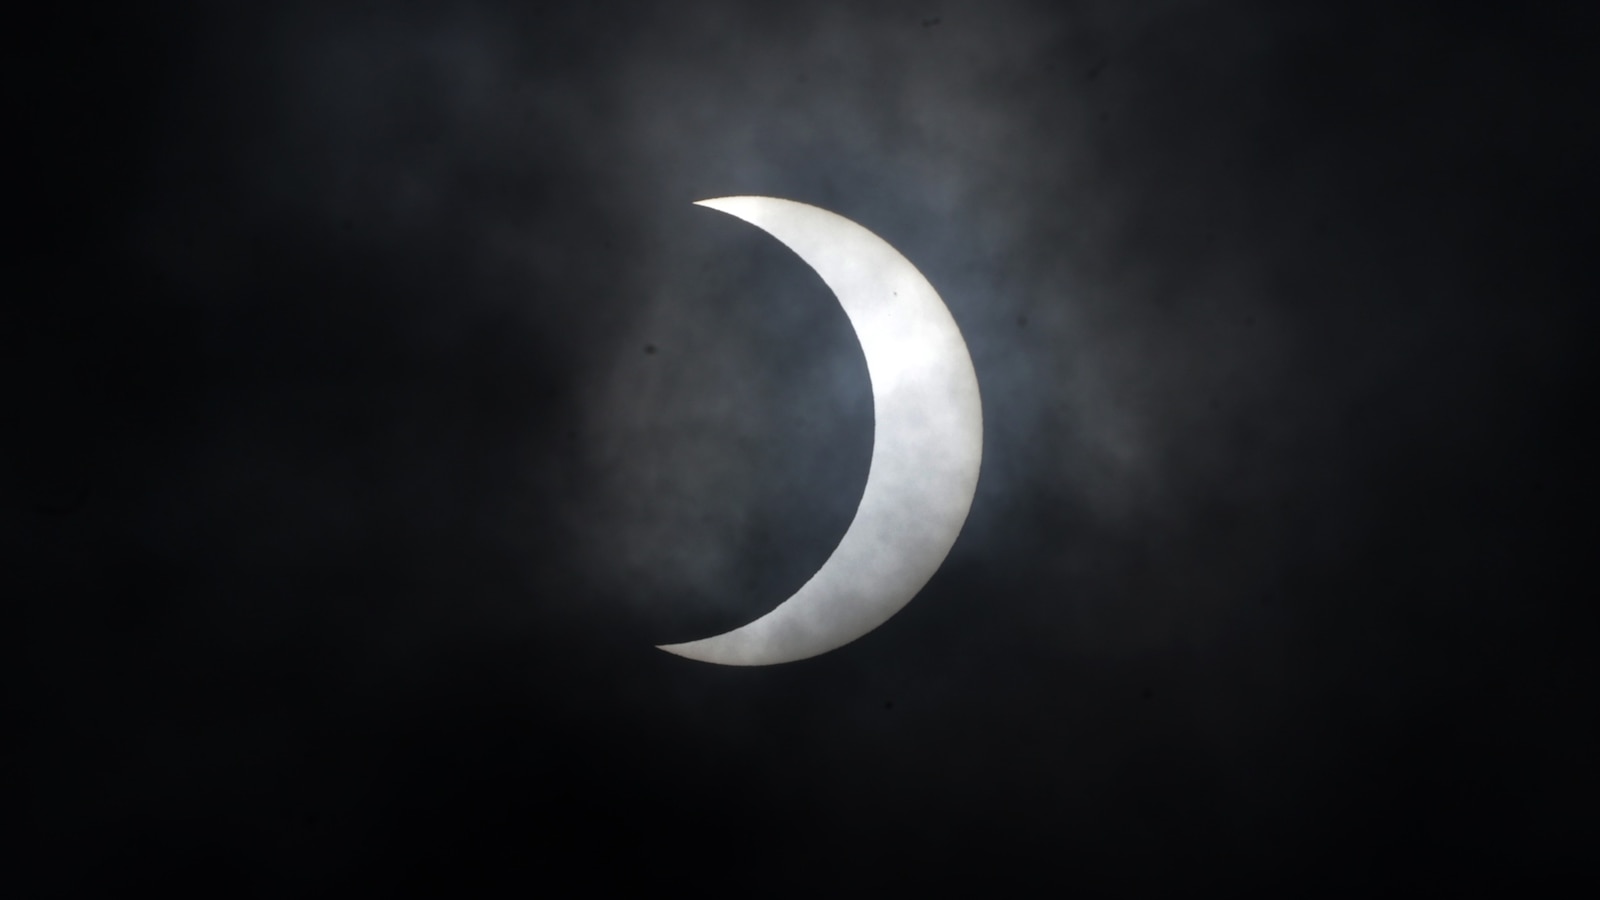 When is the next total solar eclipse in US after April 8, 2024